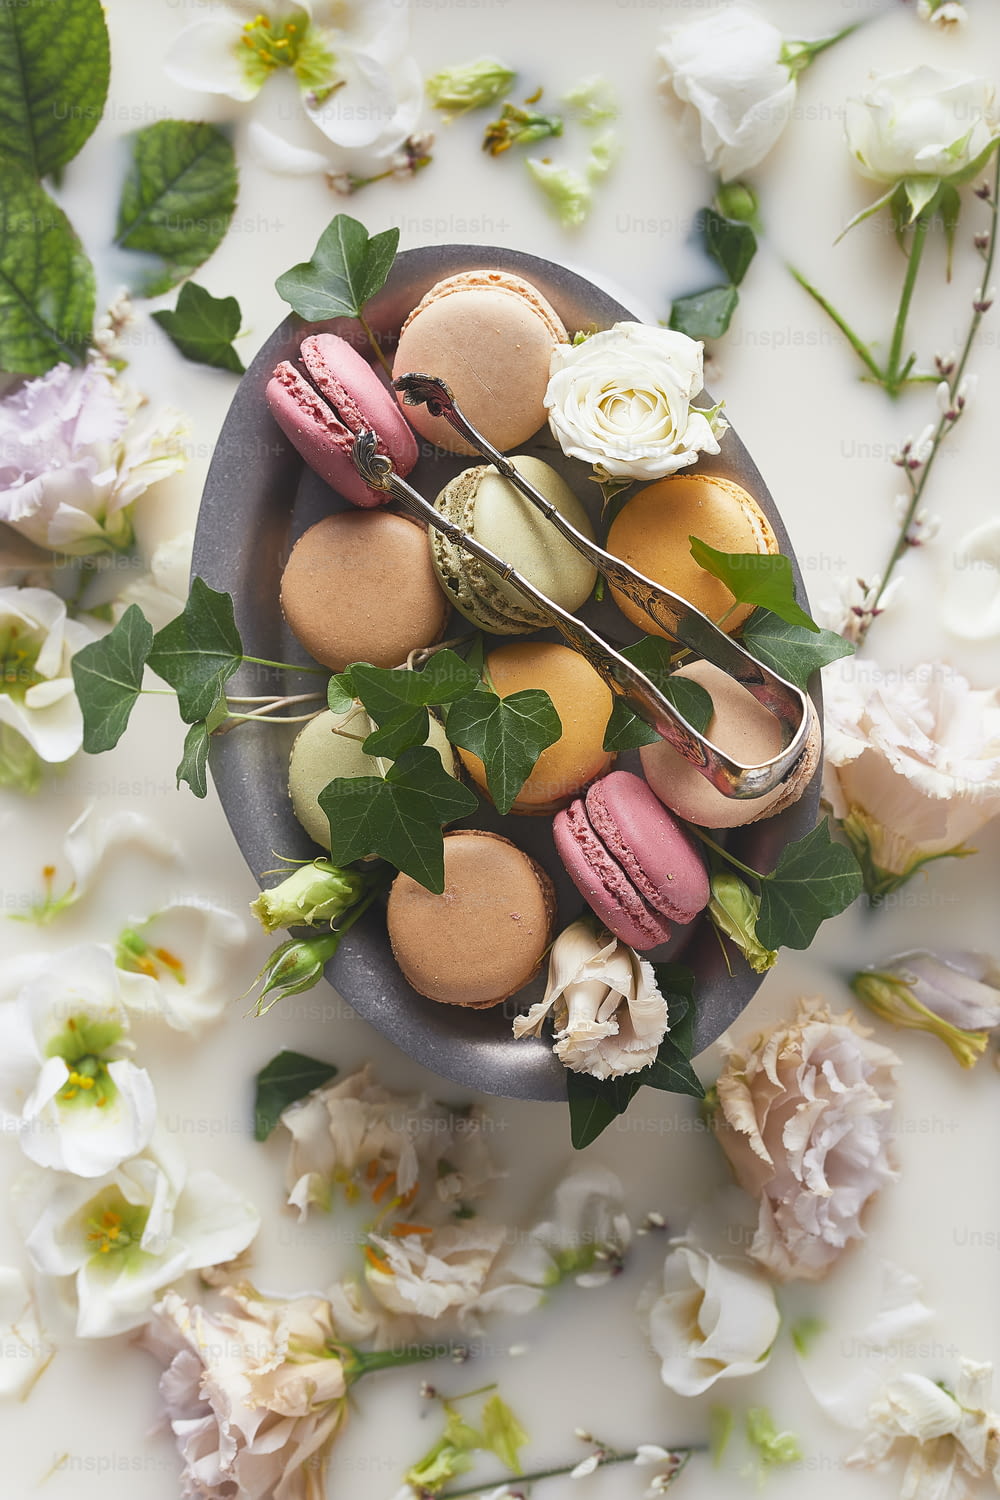 a bowl of macaroons and flowers on a table